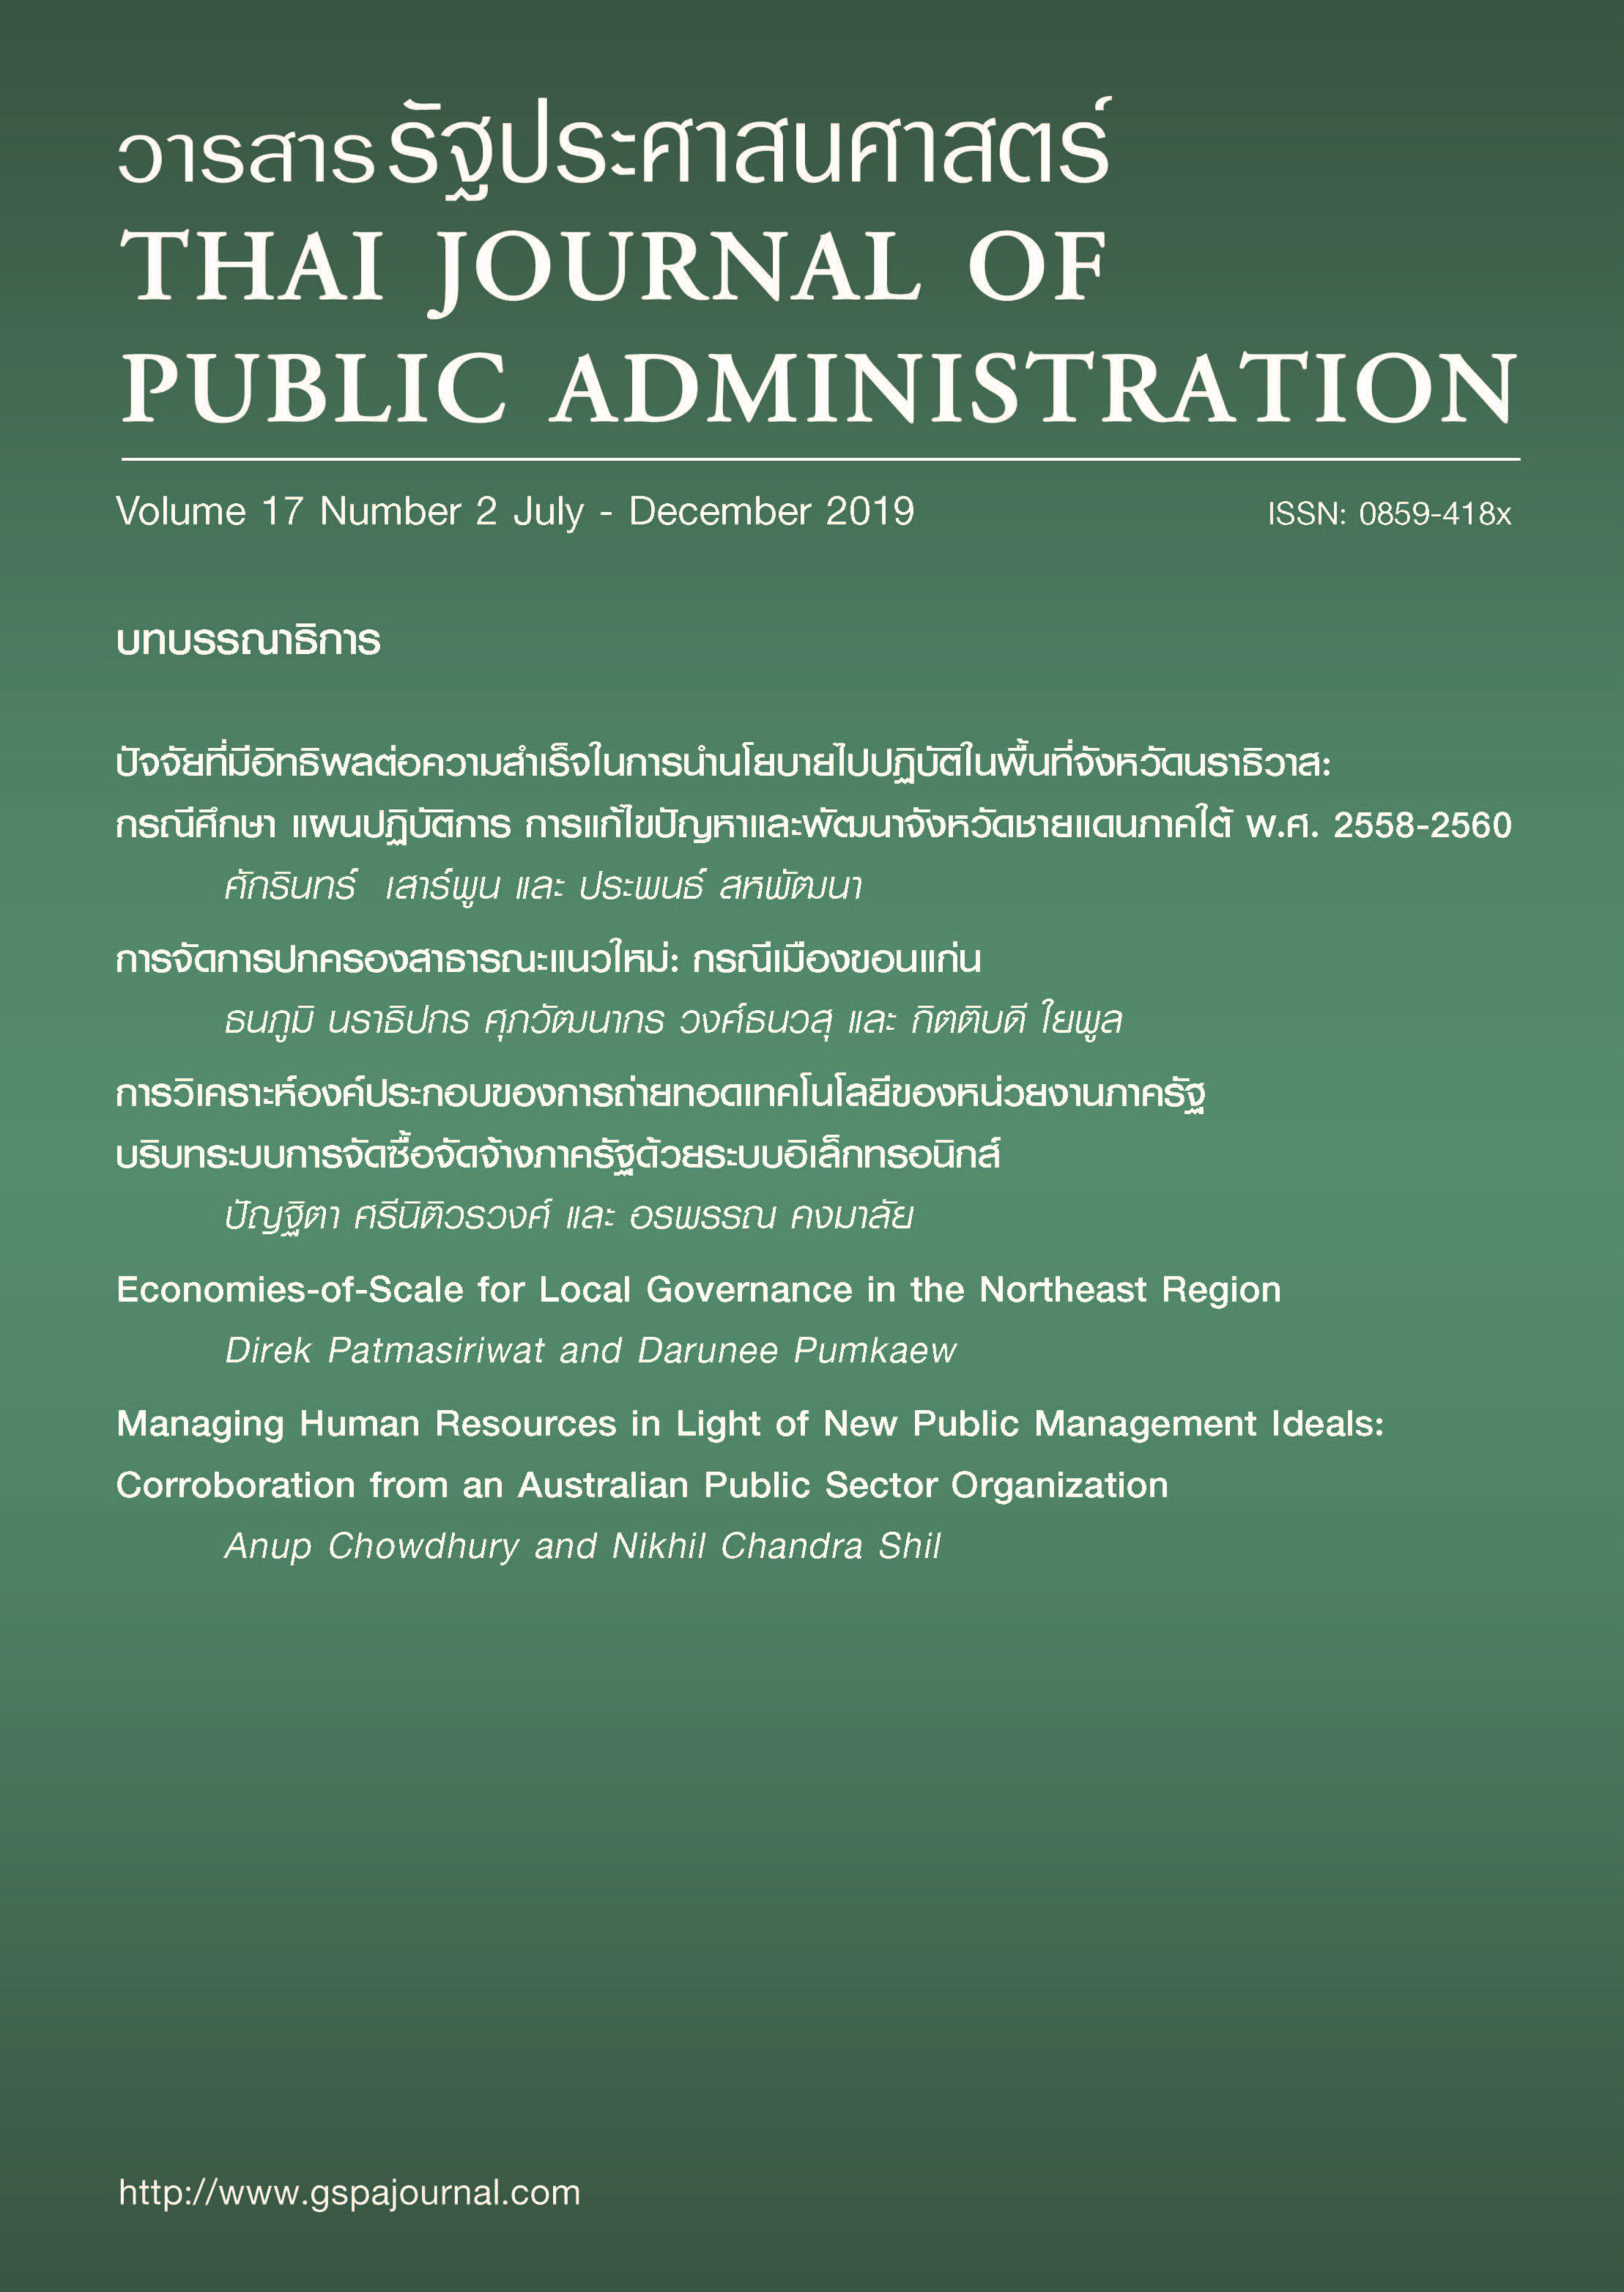 					View Vol. 17 No. 2 (2019): Thai Journal of Public Administration Volume 17 Number 2
				